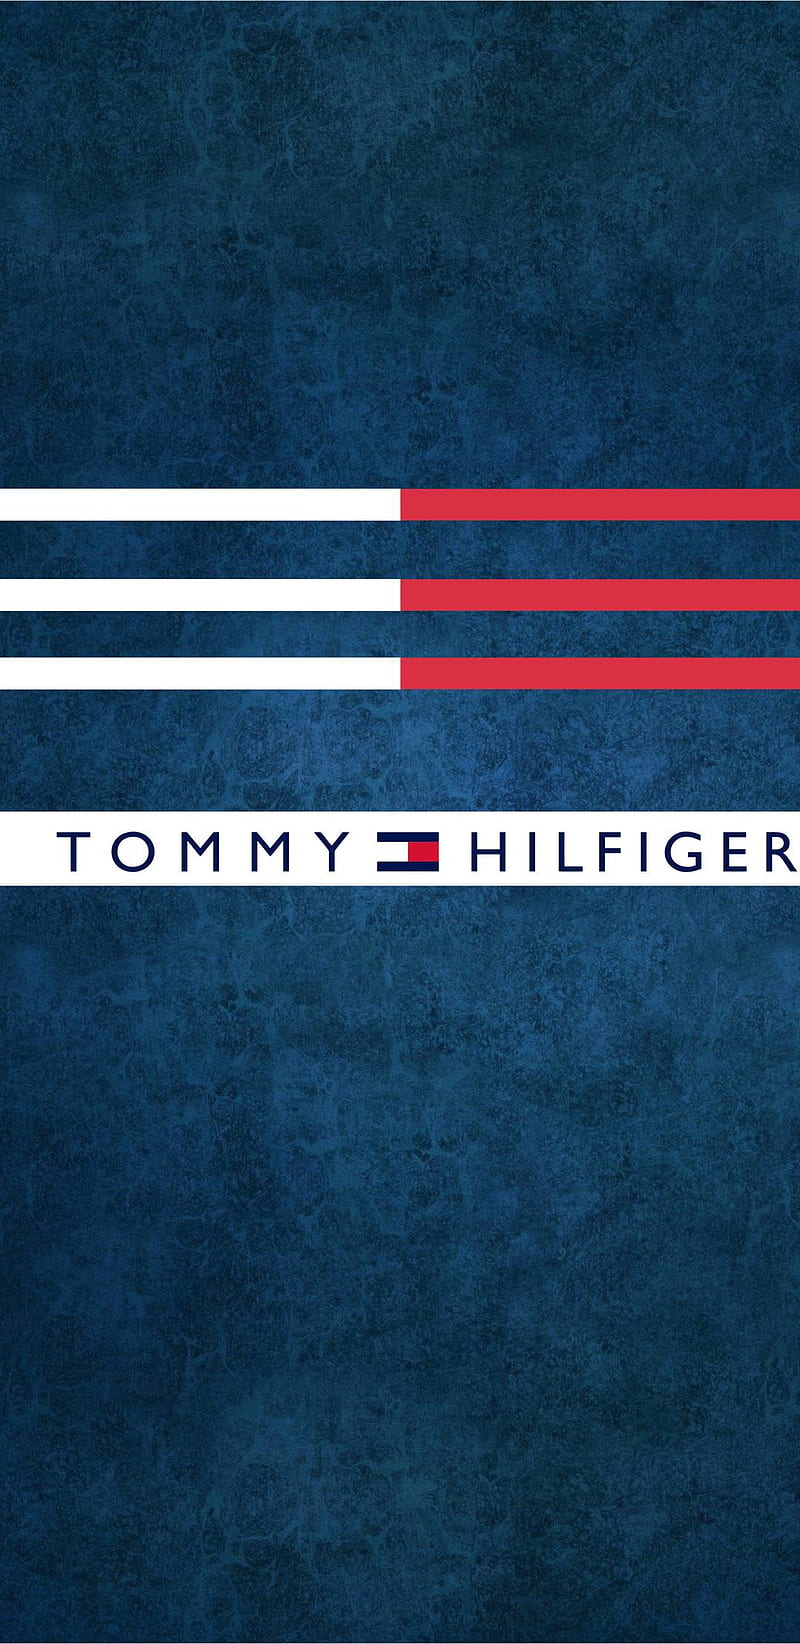 688 Tommy Hilfiger Logo Images, Stock Photos, 3D objects, & Vectors